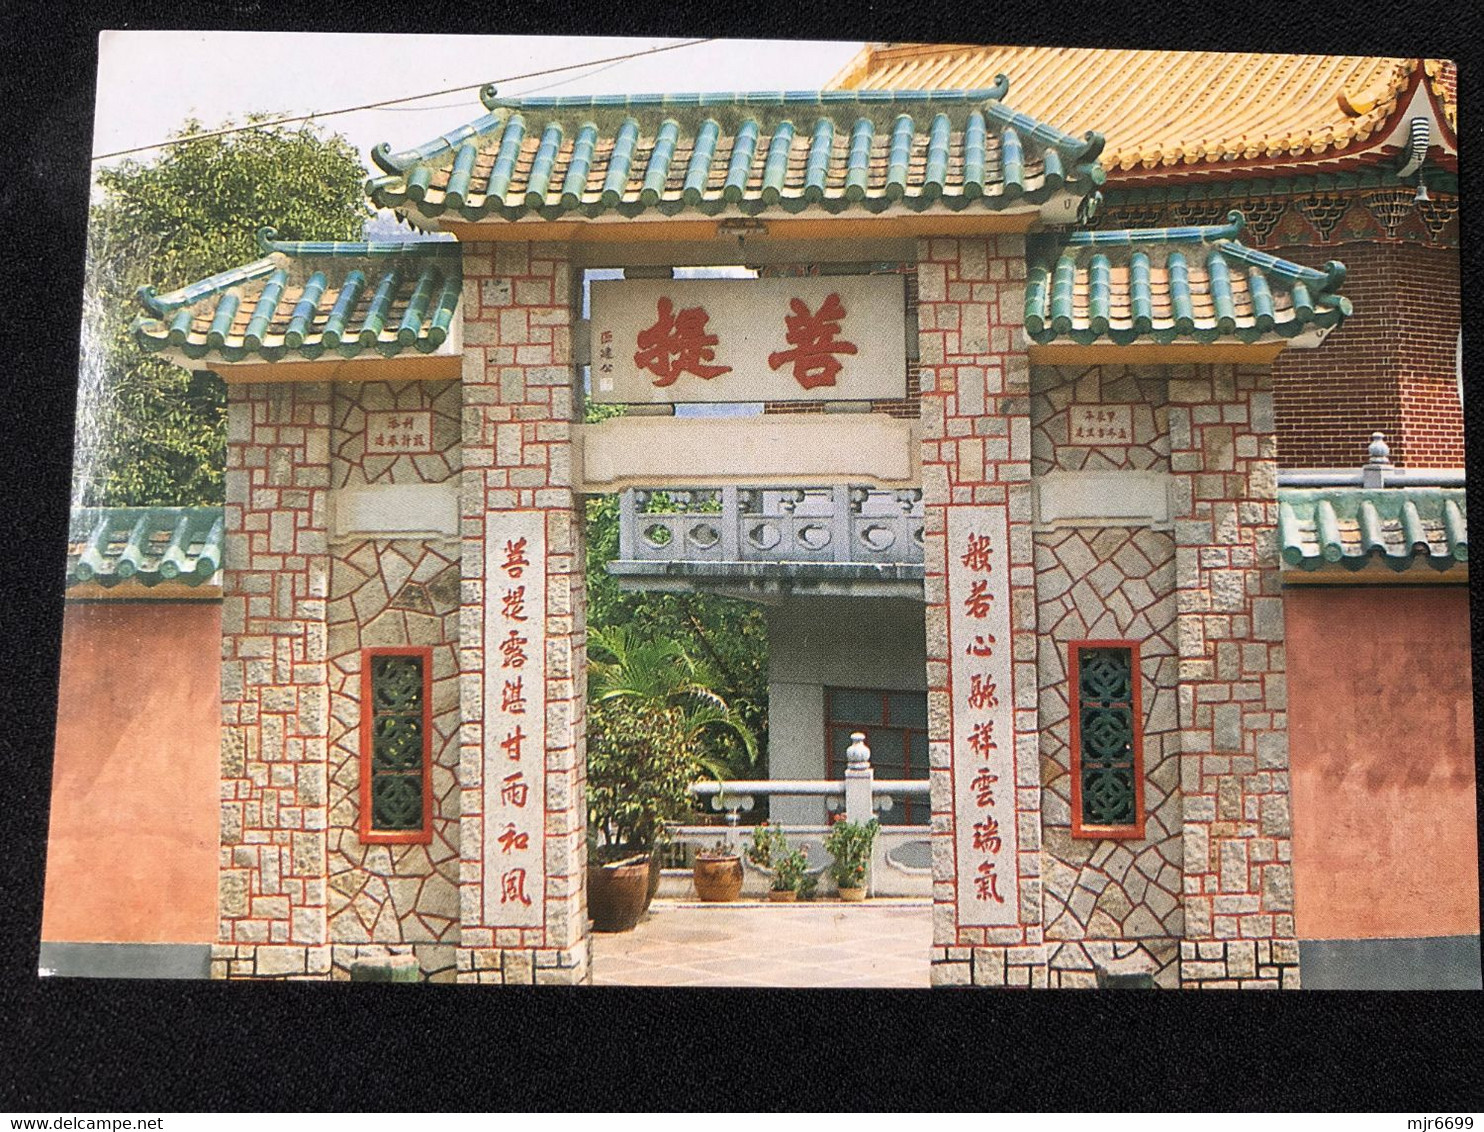 MACAU 1970'S, CHINESE TEMPLE OF TAIPA ISLAND, BOOK STORE PRINTING, SIZE 14,8 X 10CM, #H.T.- 4 - Macao